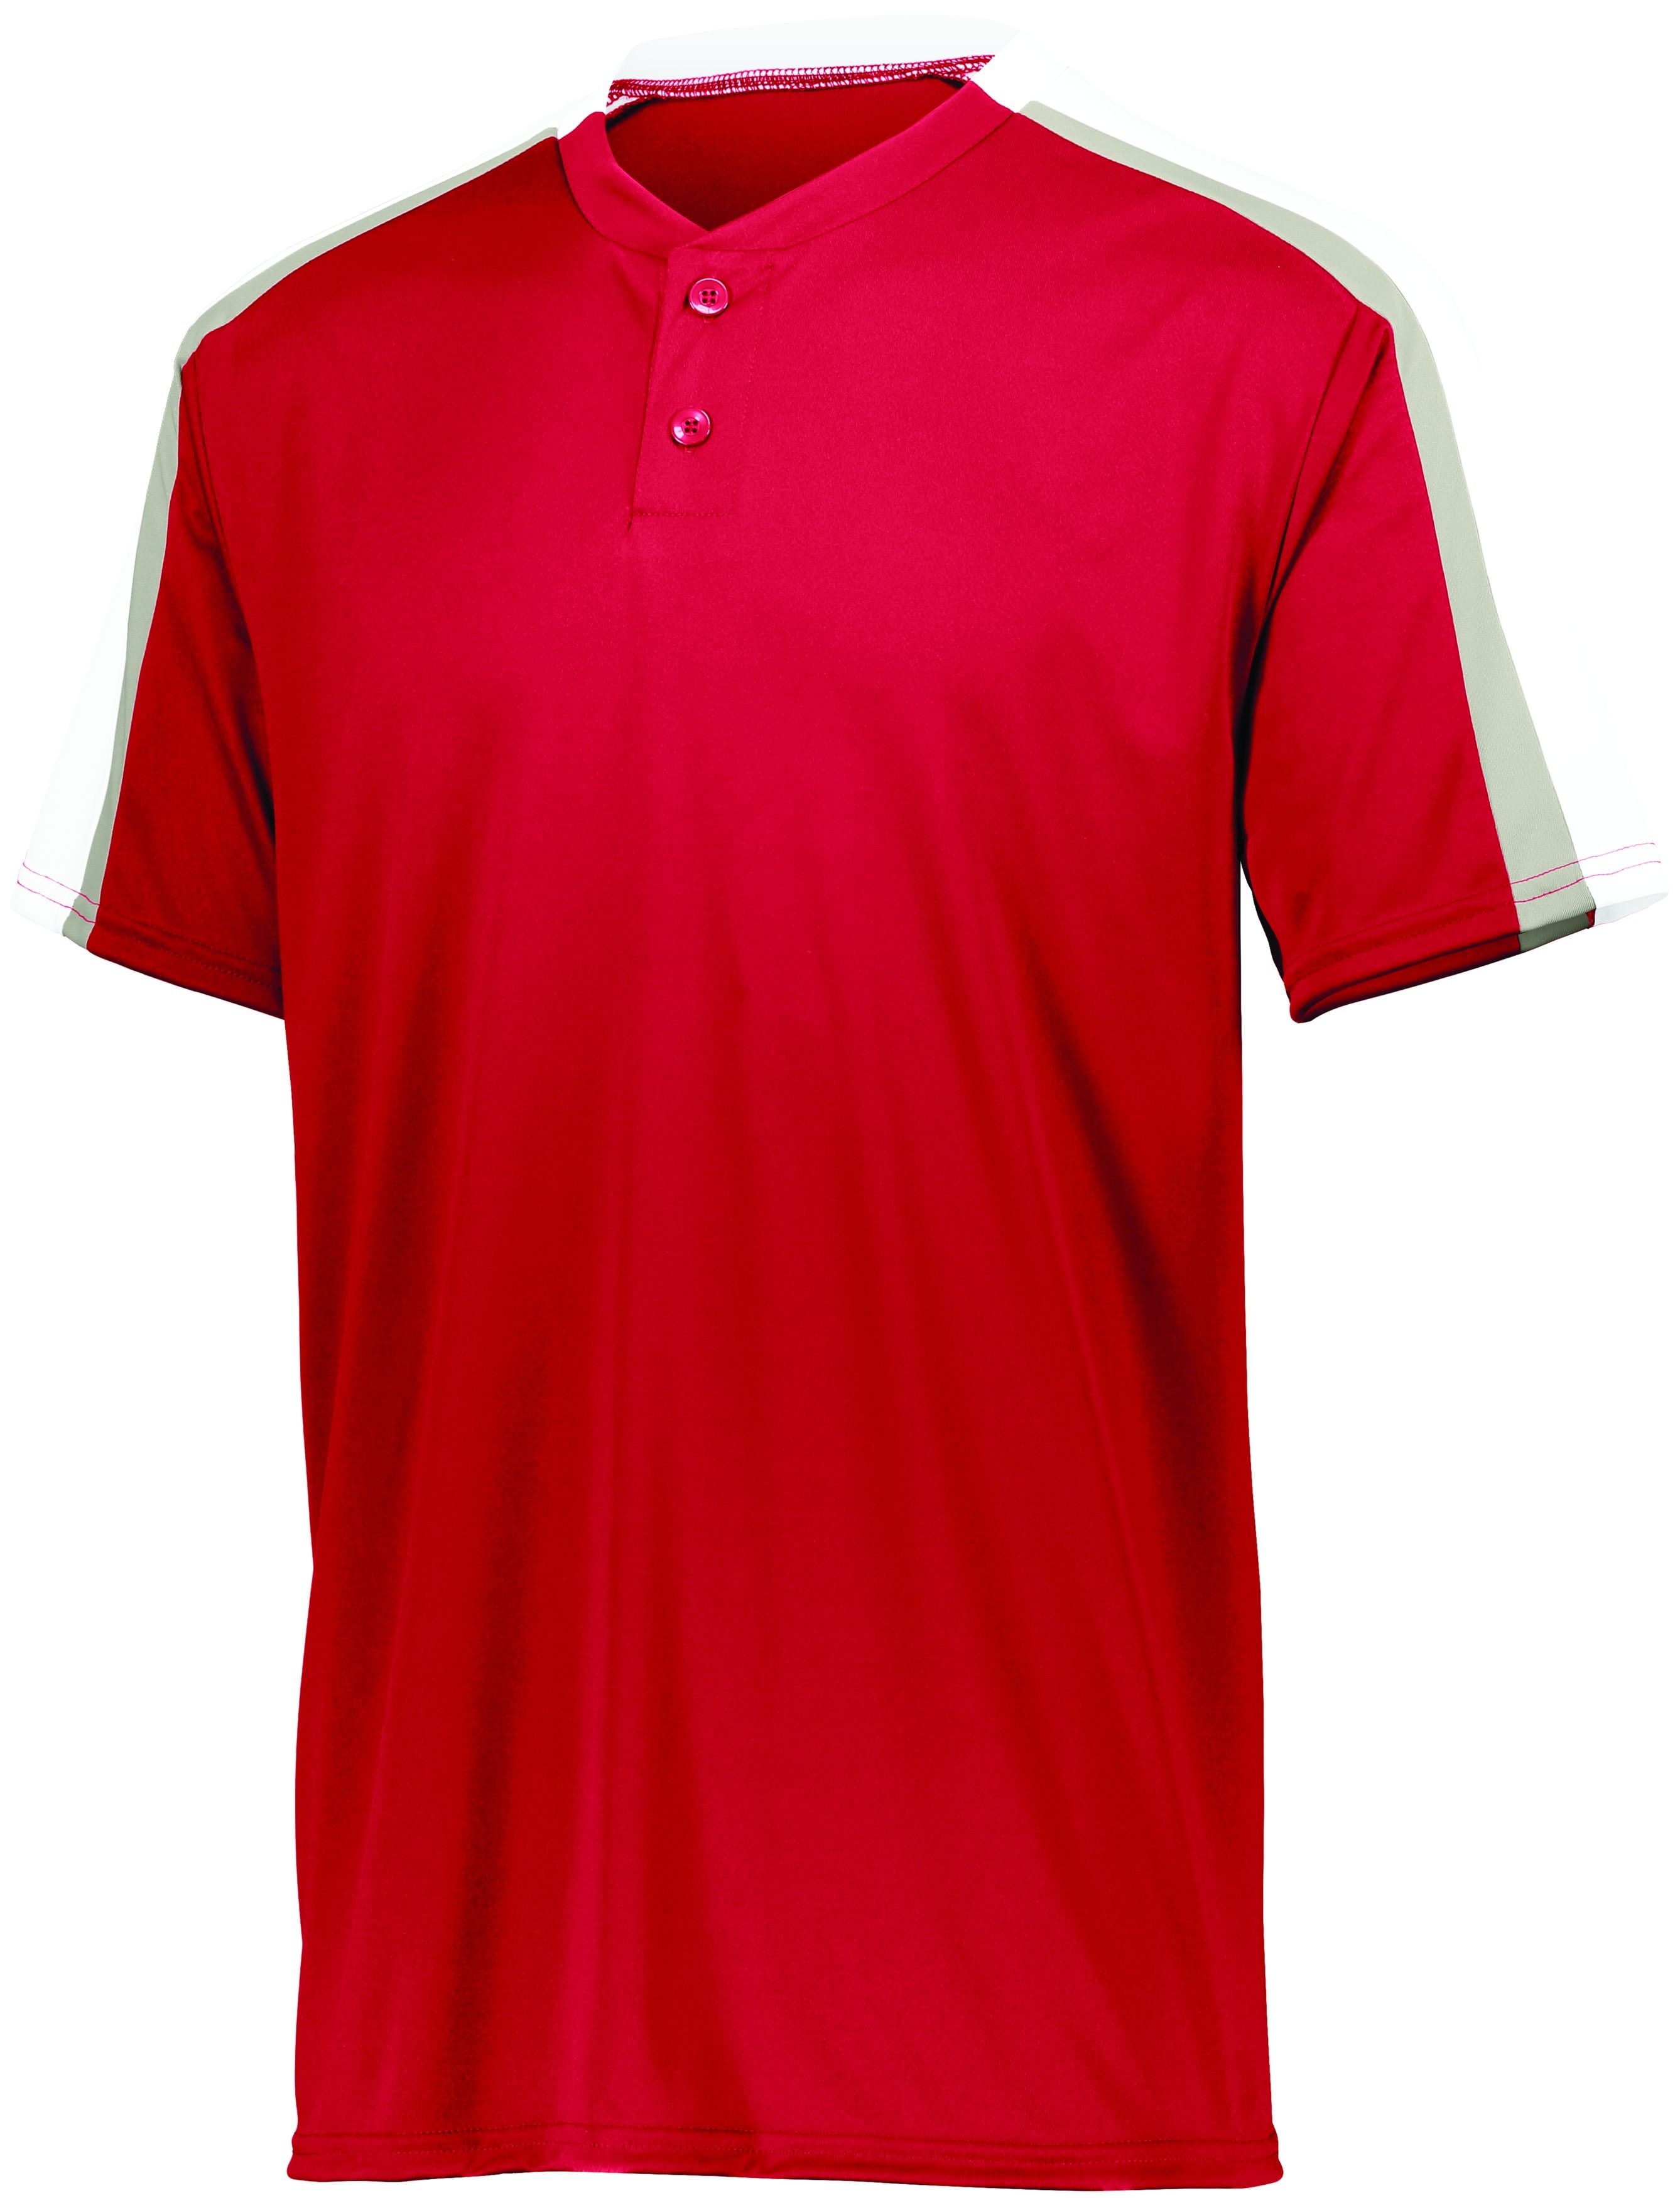 Augusta Sportswear Power Plus Jersey 2.0 in Red/White/Silver Grey  -Part of the Adult, Adult-Jersey, Augusta-Products, Baseball, Shirts, All-Sports, All-Sports-1 product lines at KanaleyCreations.com